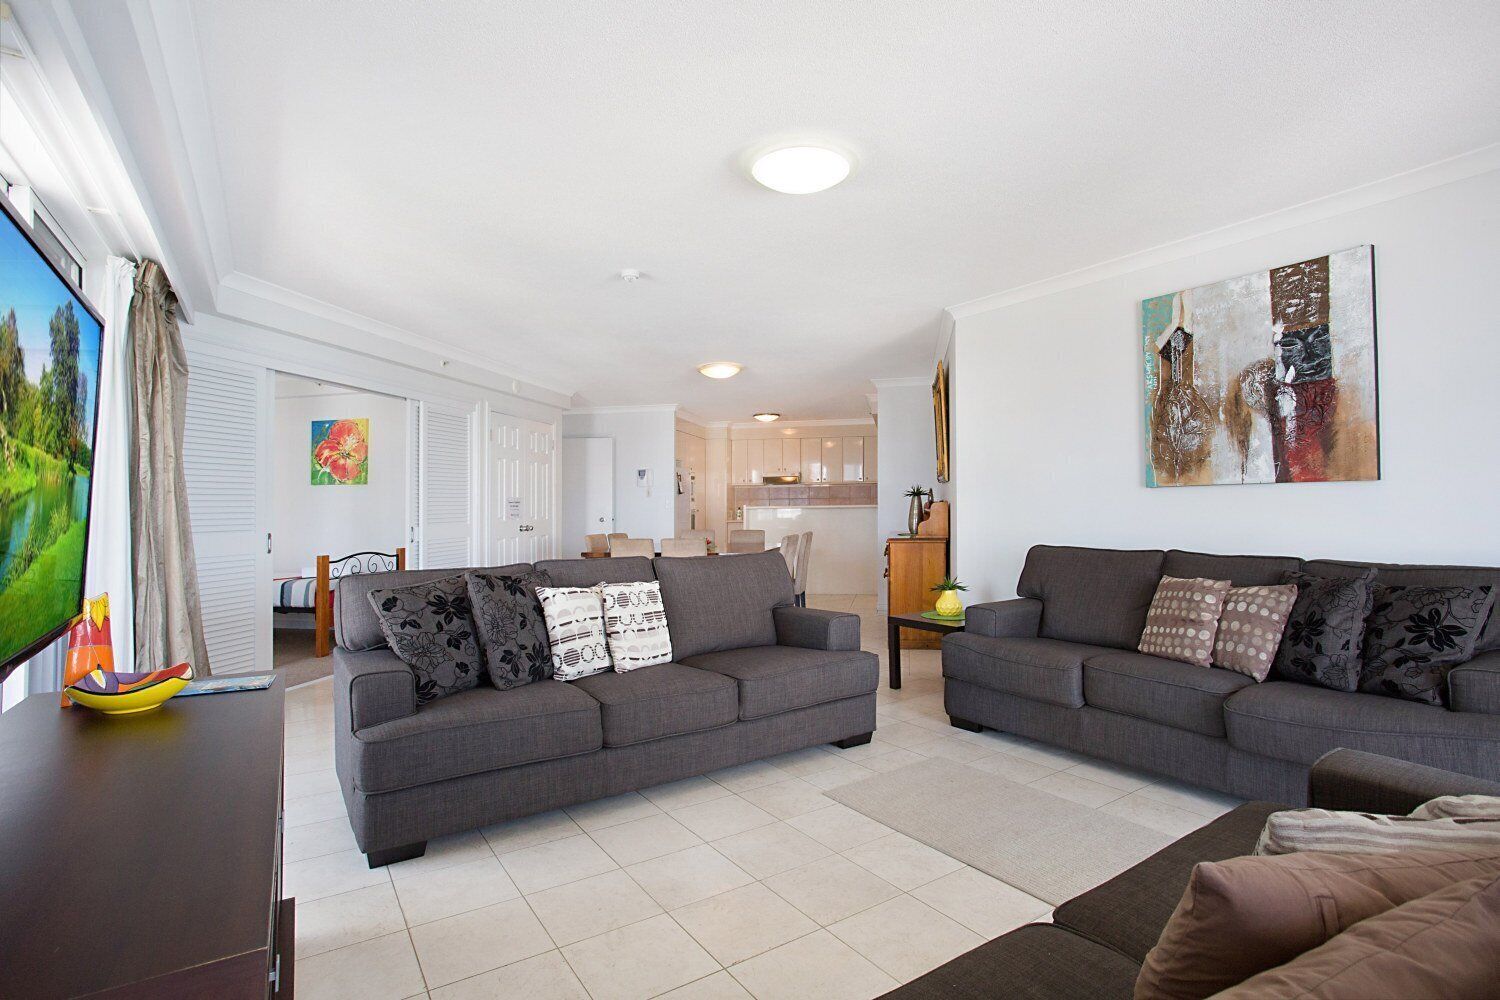 Luxury Surfers Paradise Accommodation, Apartment 287 is Indeed, Very Affordable